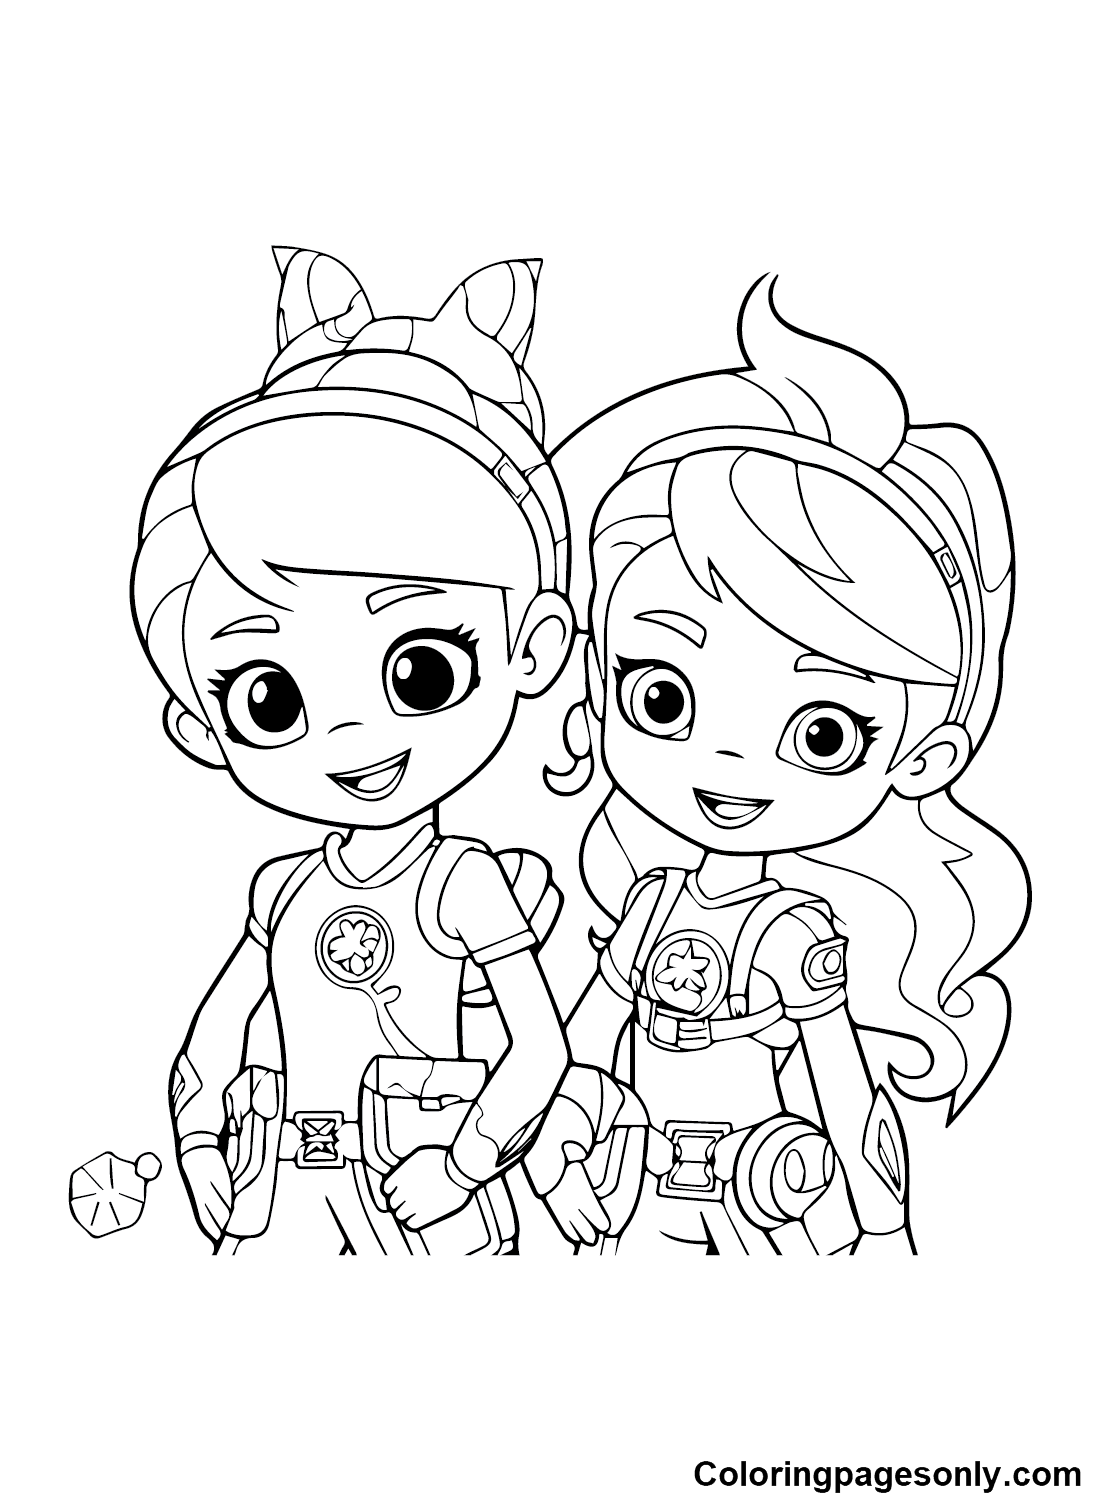 Rainbow rangers coloring pages printable for free download